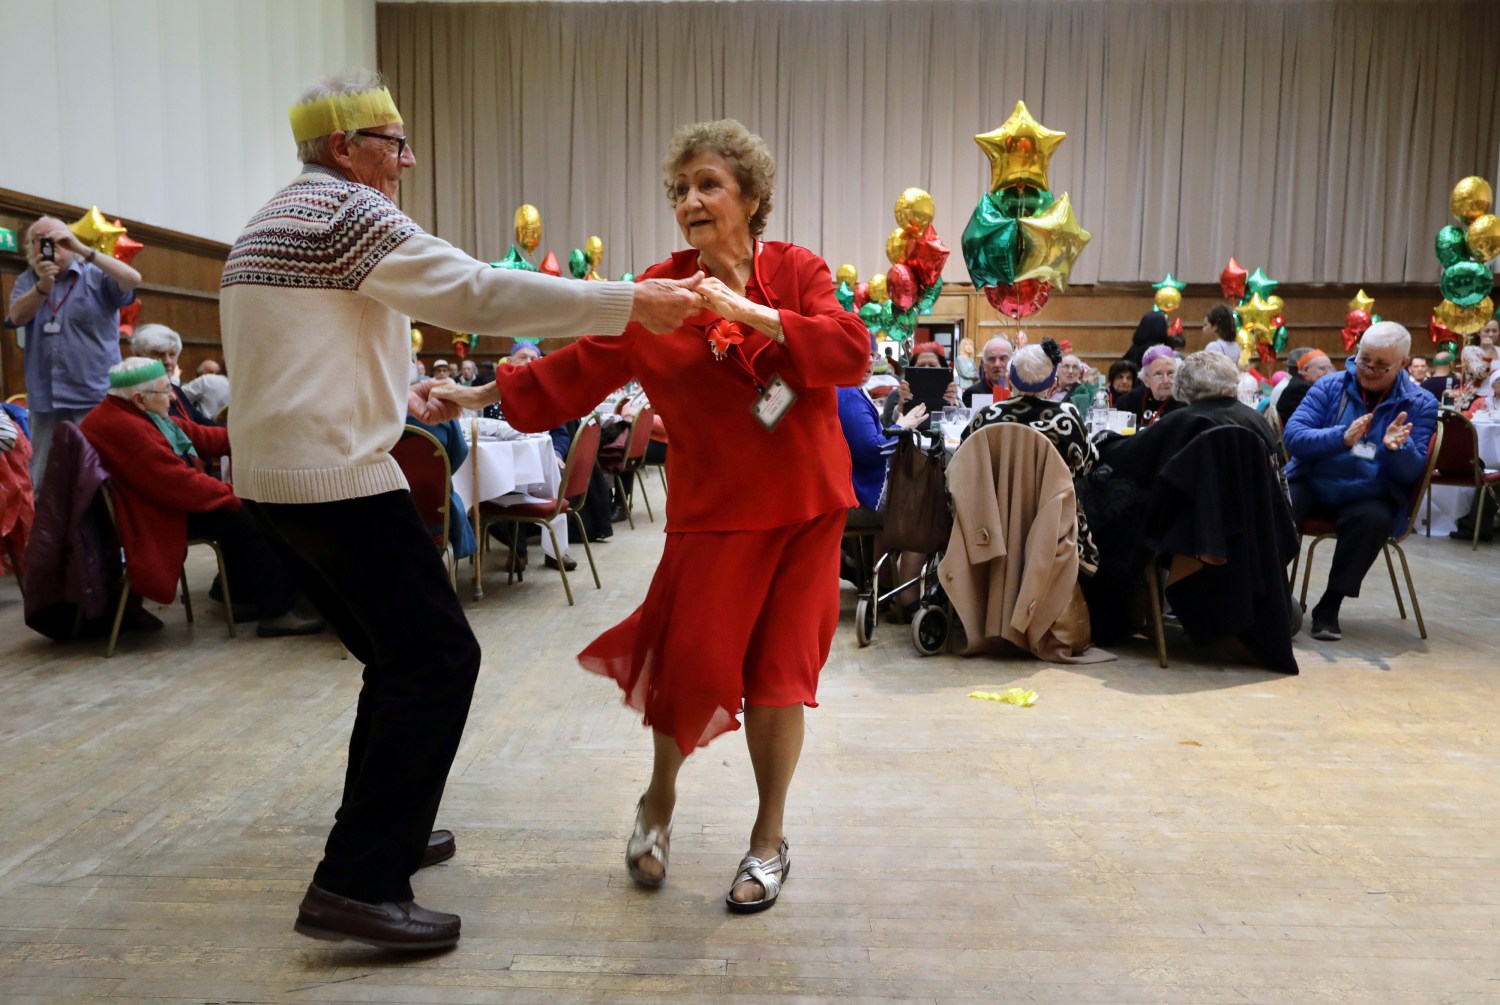 Anita Monk and her neighbour John Everett dance during a Christmas Dinner event for older people.